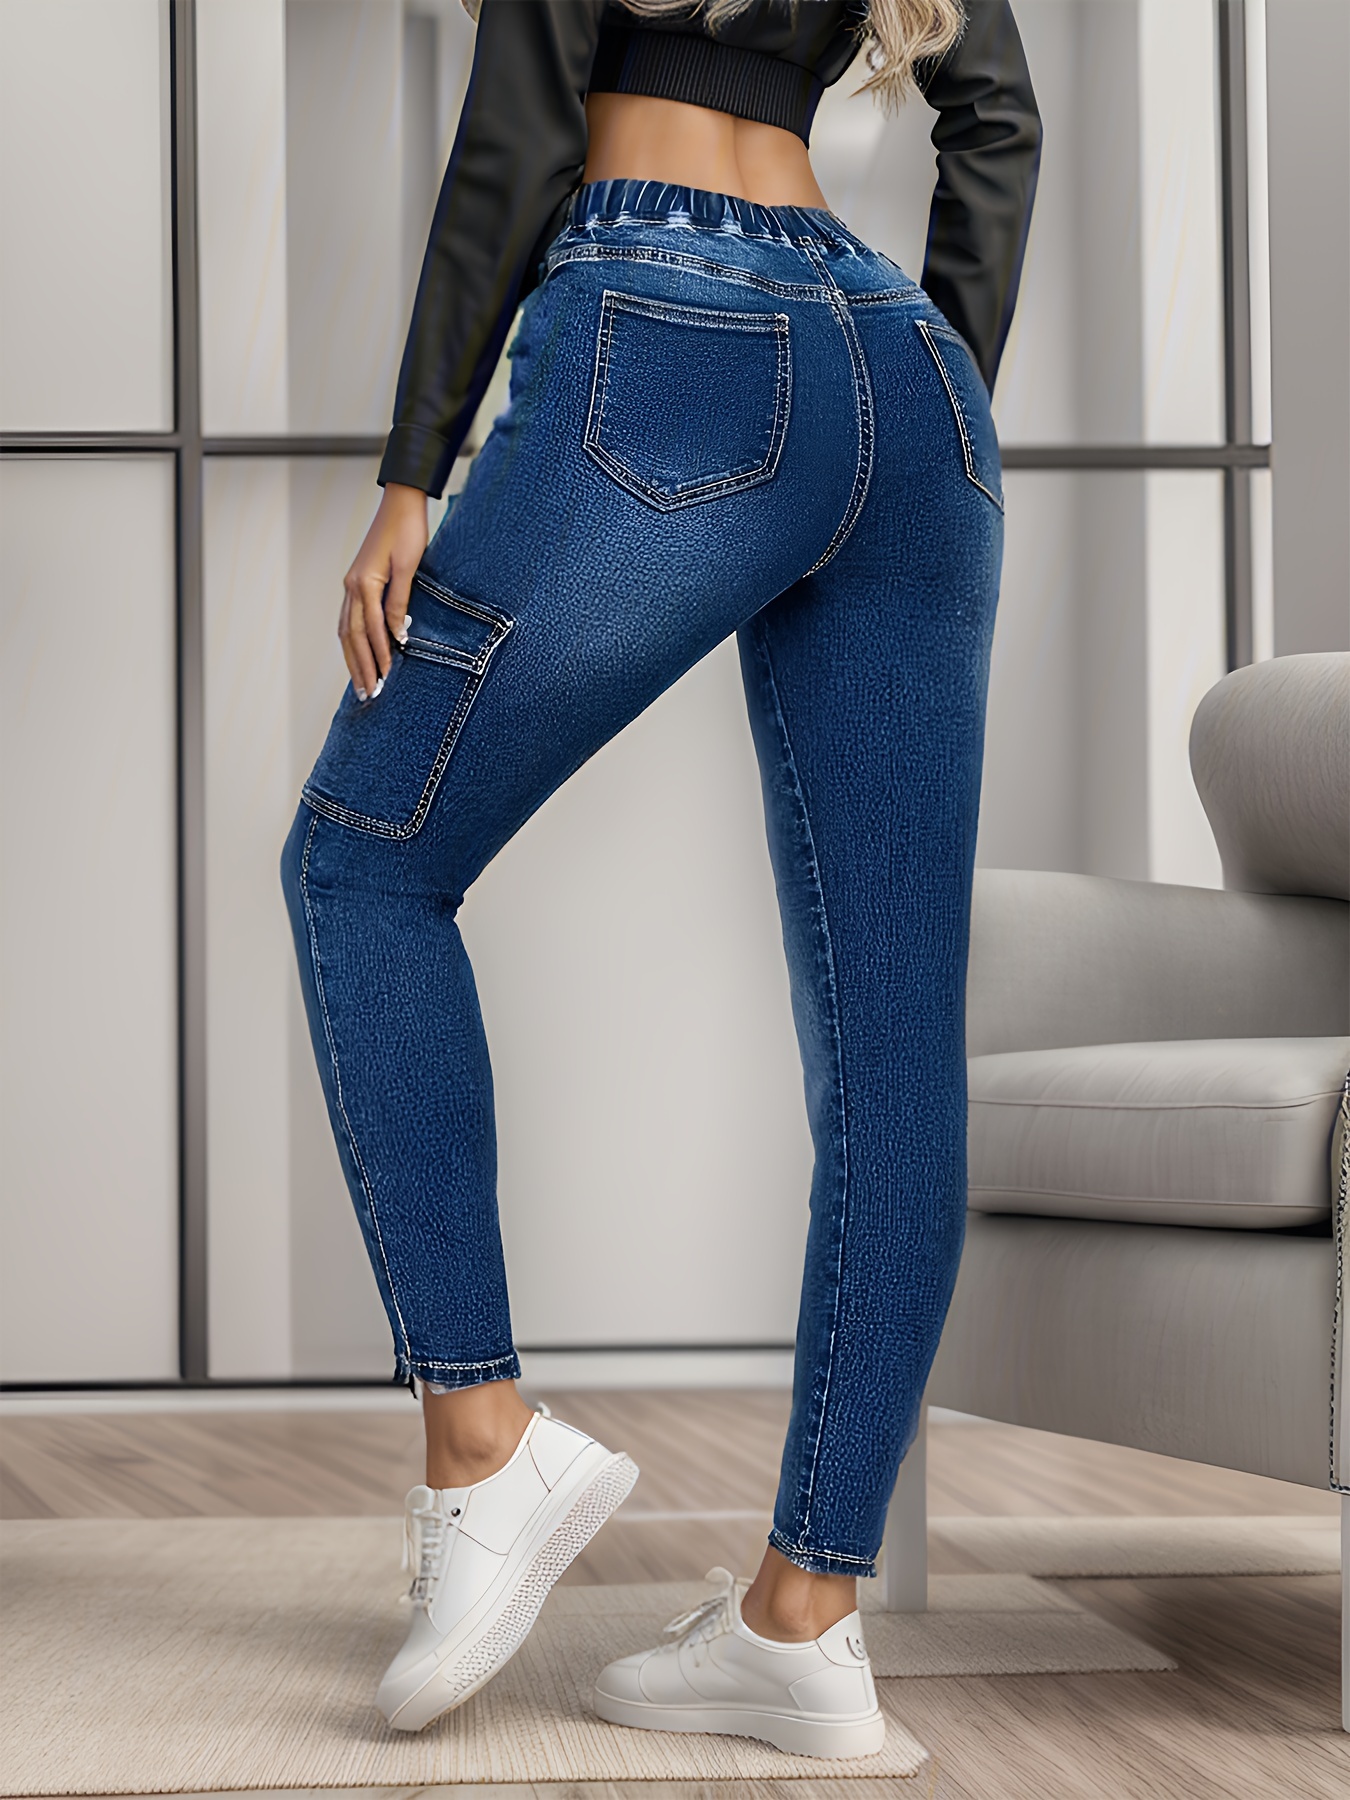 Women's Cargo Jeans, Low-Rise + High-Waisted